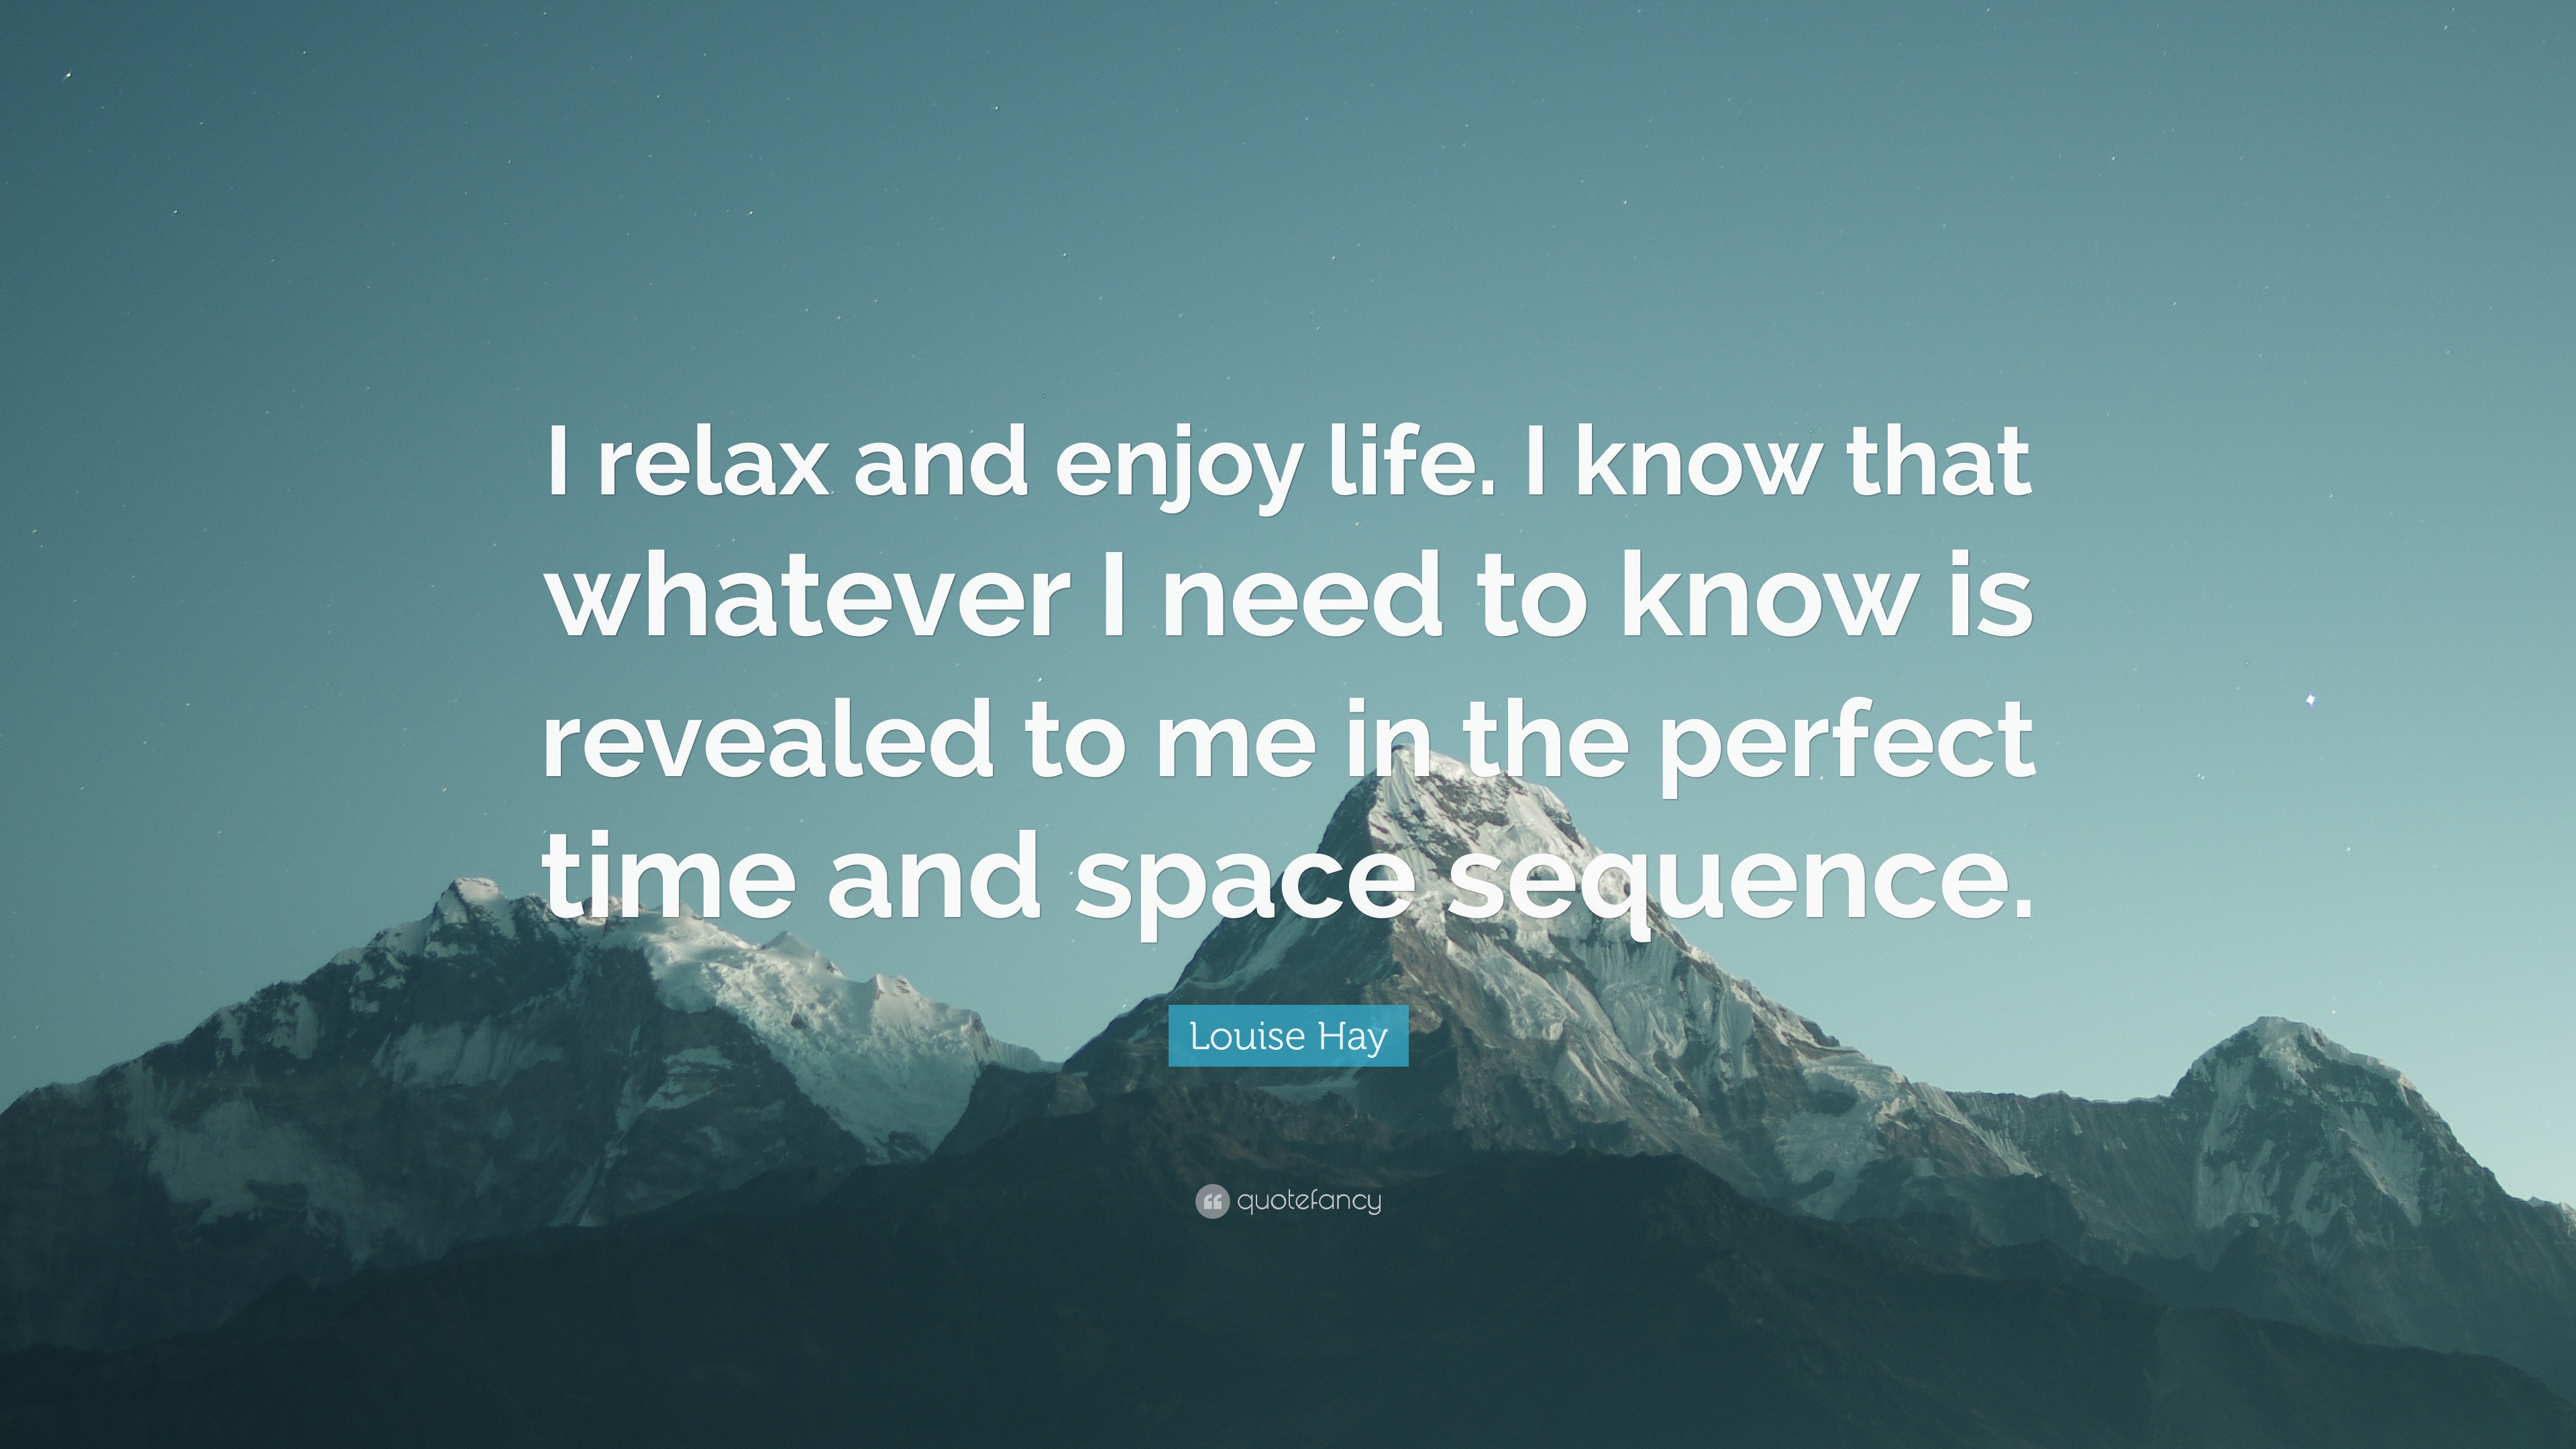 2138336 Louise Hay Quote I relax and enjoy life I know that whatever I